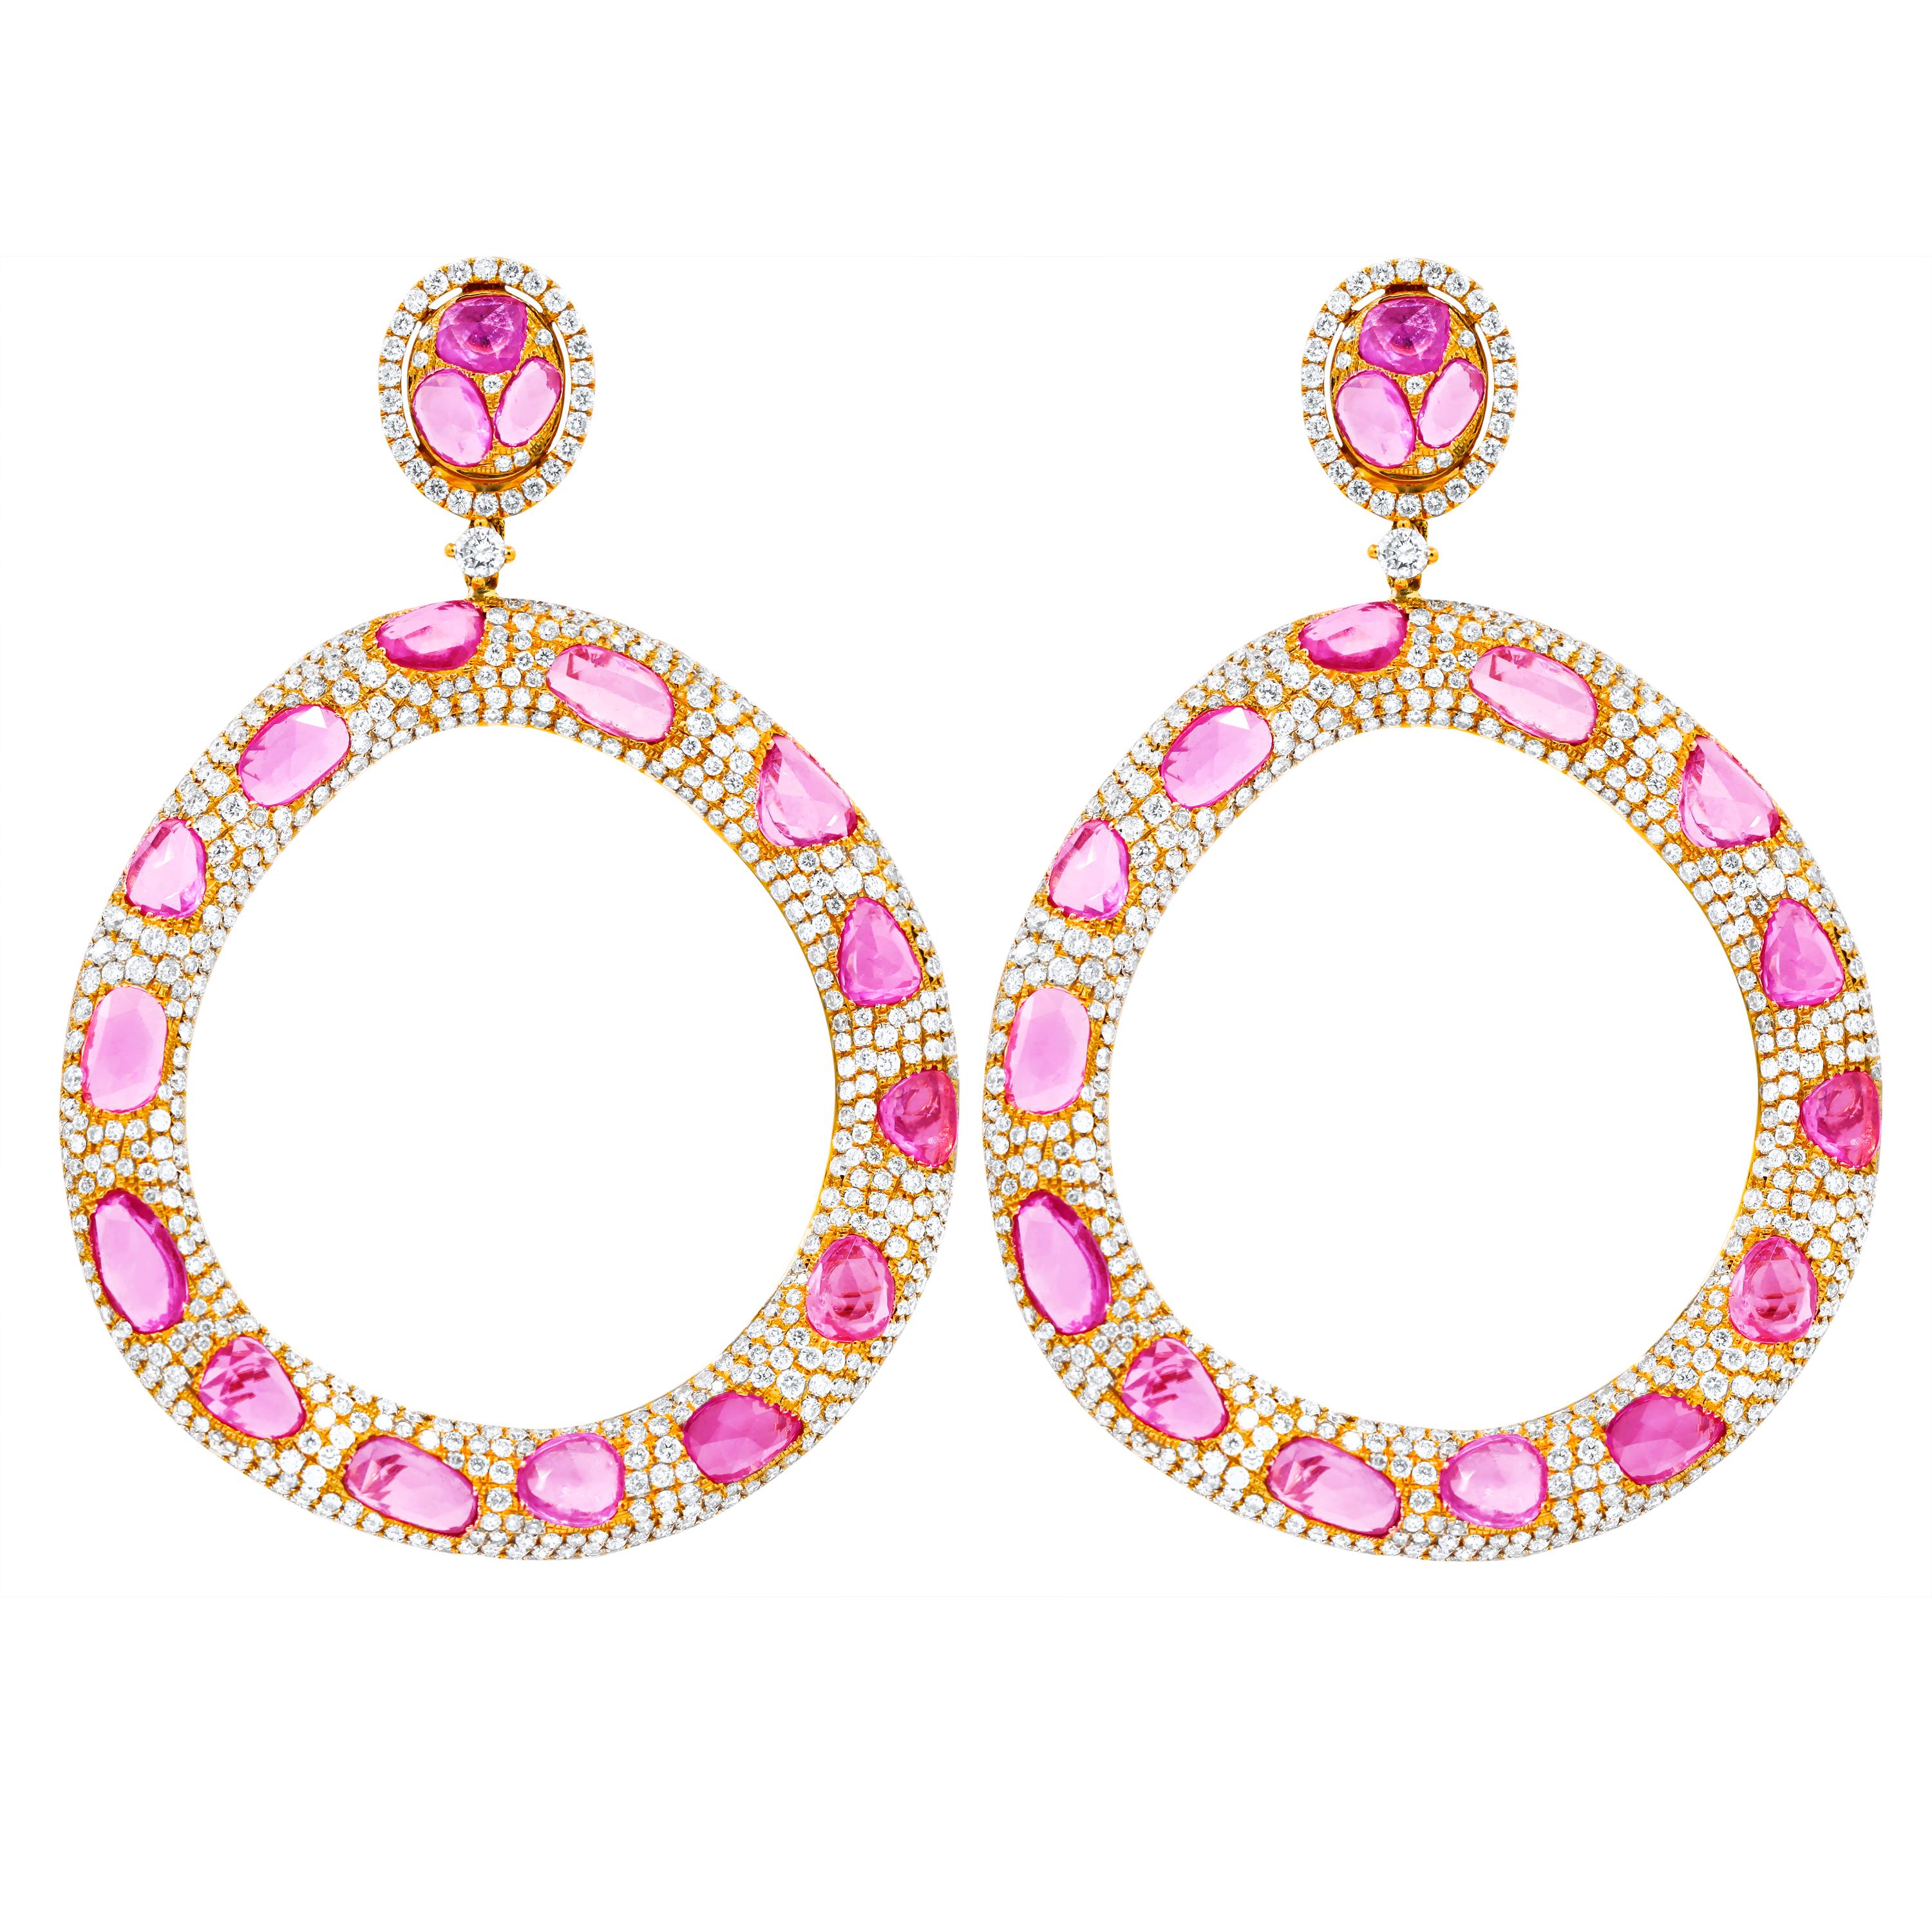 18 kt rose gold pink sapphire and diamond earrings containing 19.20 cts tw of pink sapphires and 15.95 cts tw of diamonds (C.Dunaigre certified)
Diana M. is a leading supplier of top-quality fine jewelry for over 35 years.
Diana M is one-stop shop